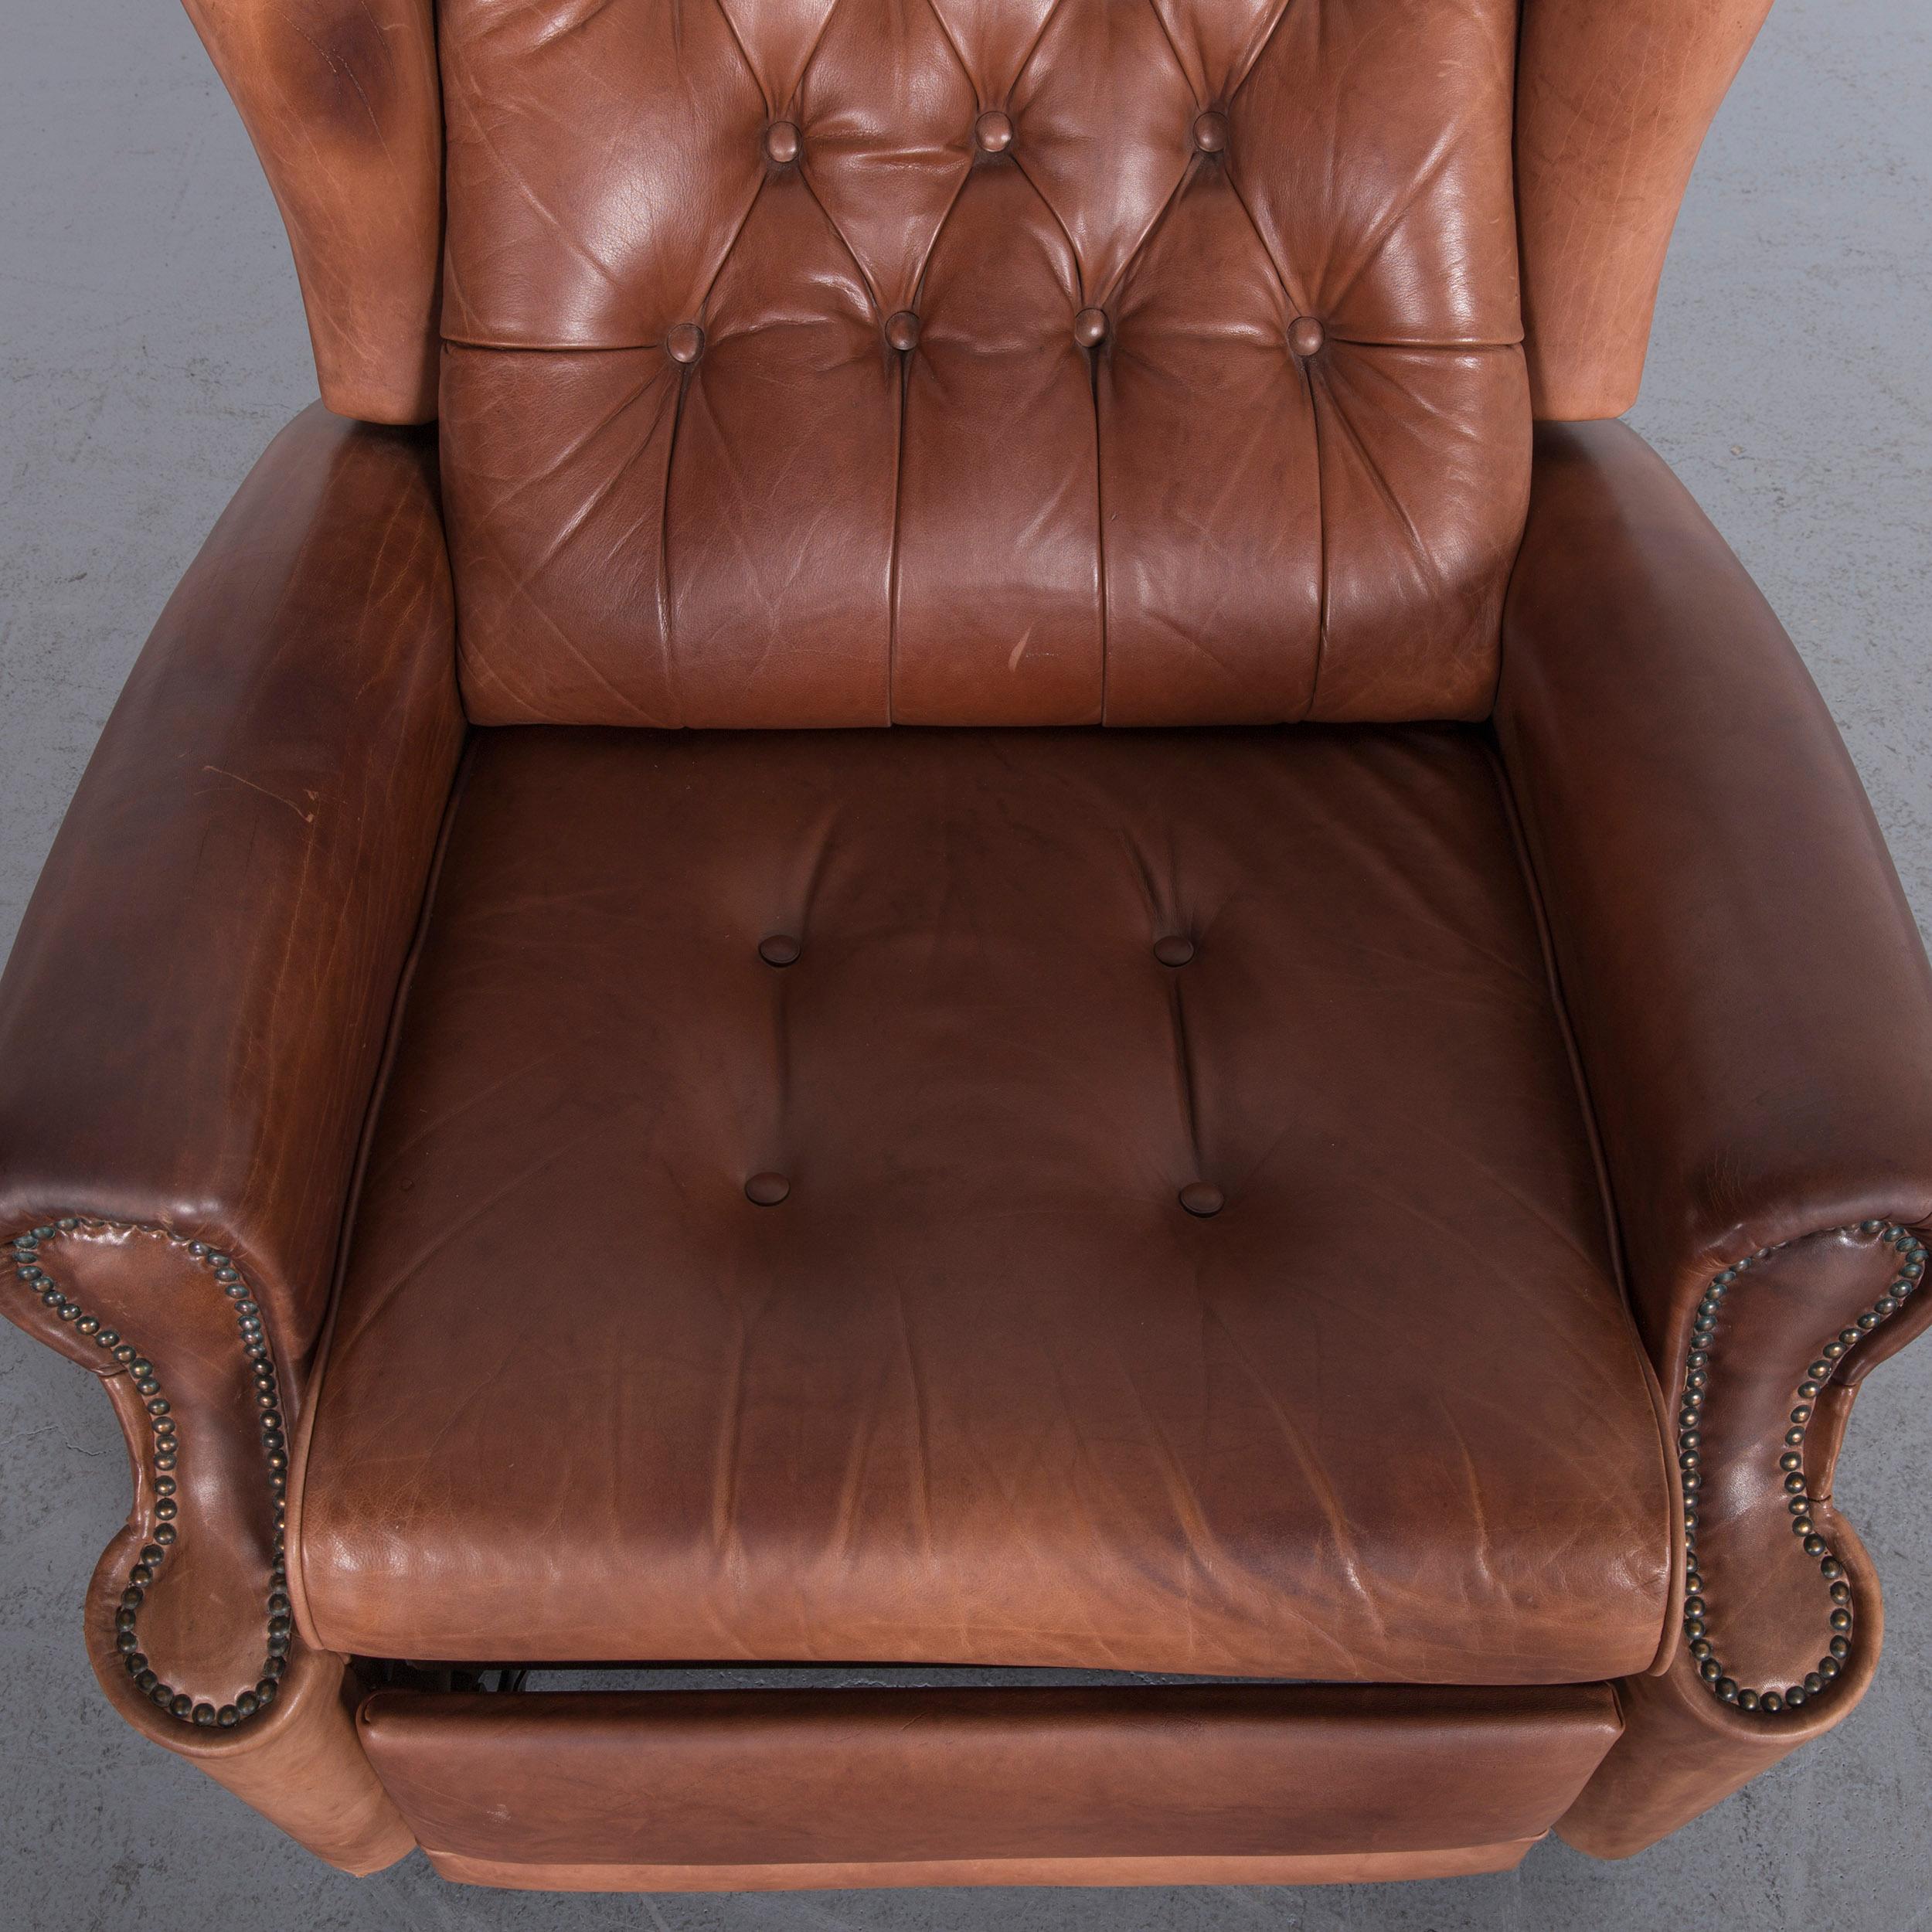 Chesterfield Leather Armchair Brown One-Seat Vintage Retro with Relax Function 4